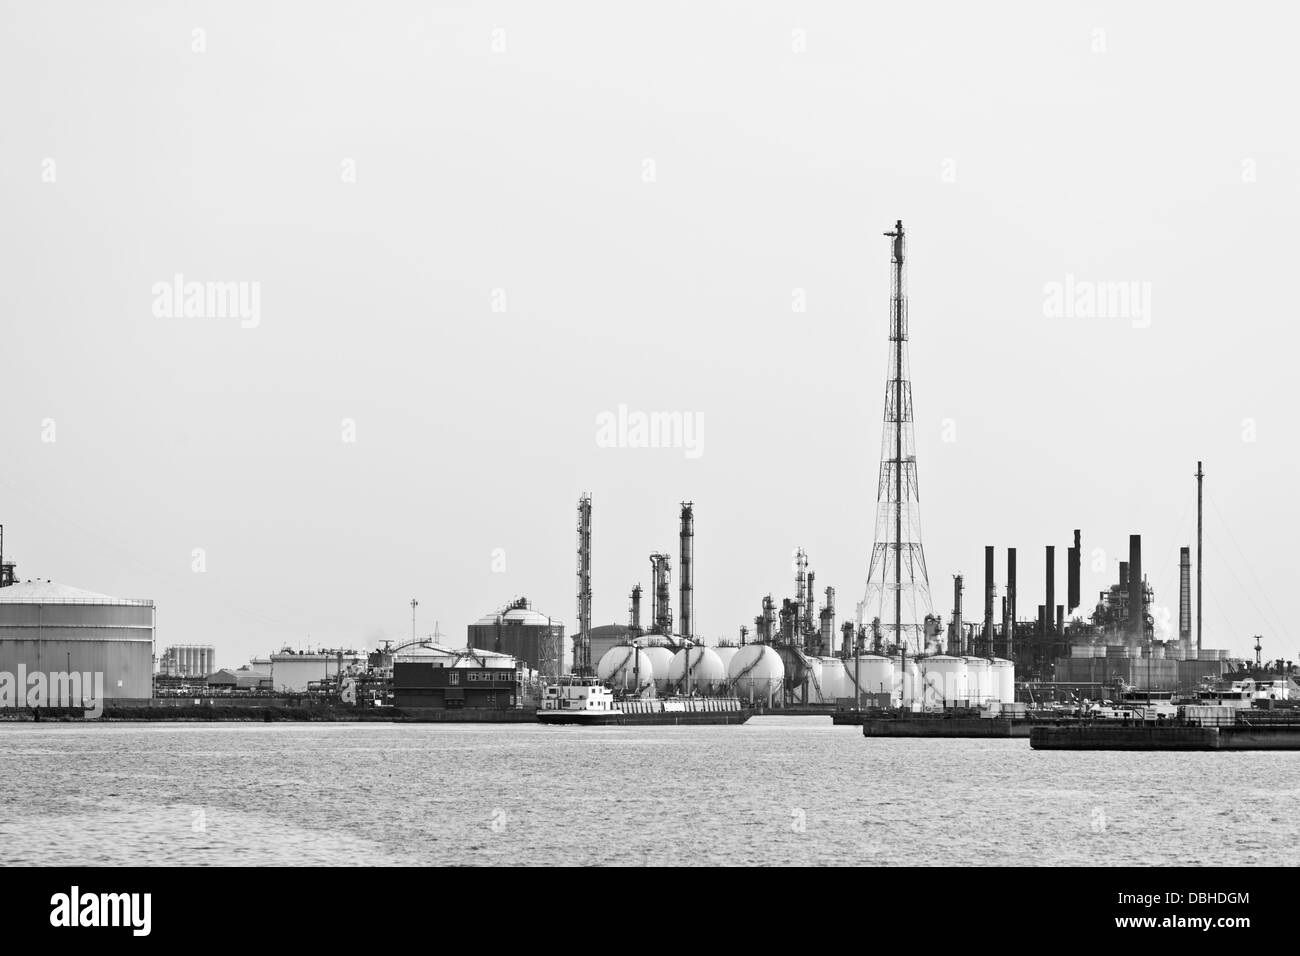 Distillation towers and oil storage tanks in a refinery during daytime, black and white shot. Stock Photo